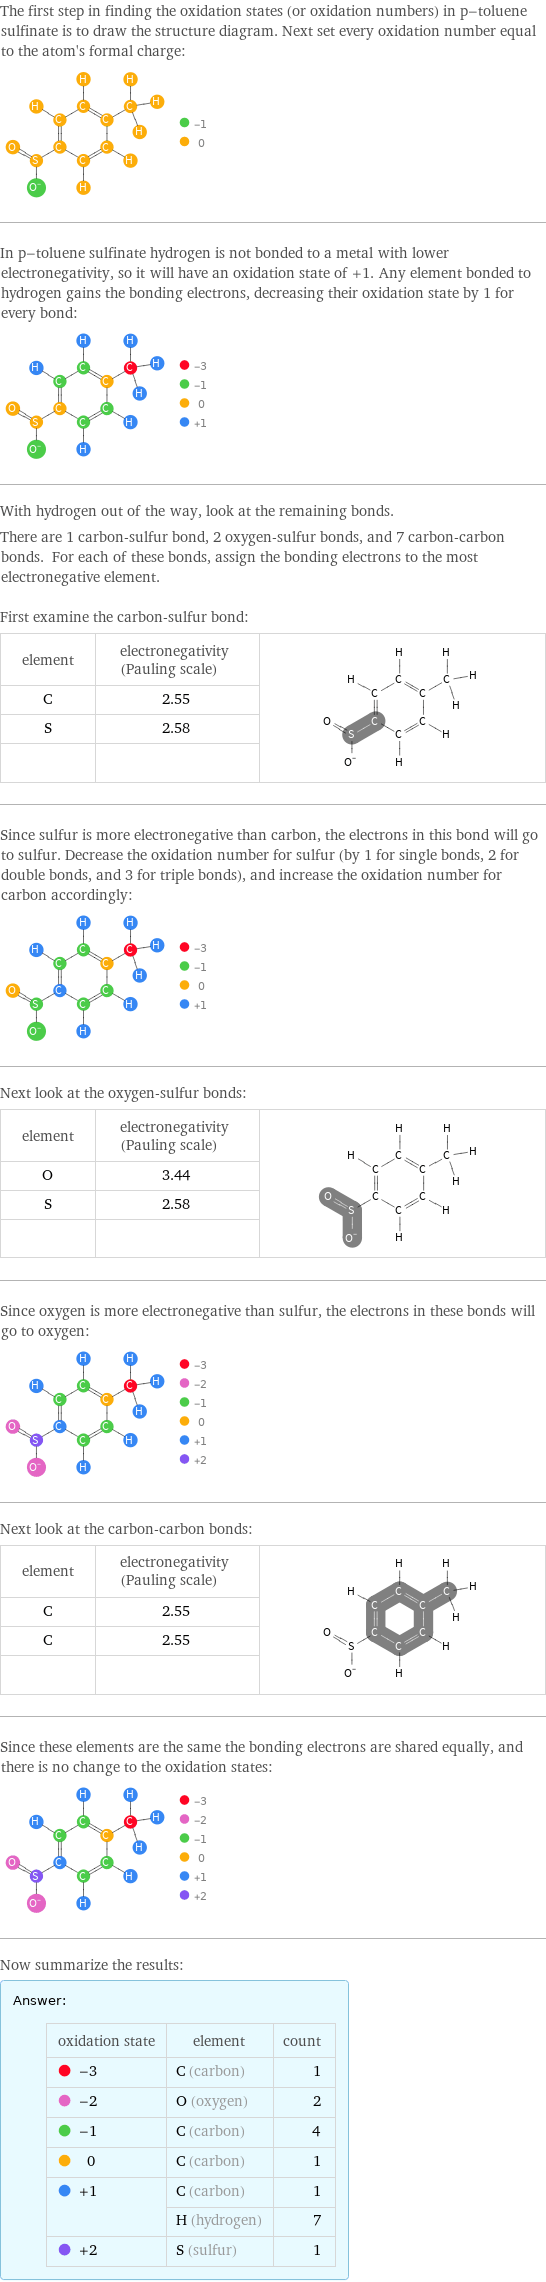 The first step in finding the oxidation states (or oxidation numbers) in p-toluene sulfinate is to draw the structure diagram. Next set every oxidation number equal to the atom's formal charge:  In p-toluene sulfinate hydrogen is not bonded to a metal with lower electronegativity, so it will have an oxidation state of +1. Any element bonded to hydrogen gains the bonding electrons, decreasing their oxidation state by 1 for every bond:  With hydrogen out of the way, look at the remaining bonds. There are 1 carbon-sulfur bond, 2 oxygen-sulfur bonds, and 7 carbon-carbon bonds. For each of these bonds, assign the bonding electrons to the most electronegative element.  First examine the carbon-sulfur bond: element | electronegativity (Pauling scale) |  C | 2.55 |  S | 2.58 |   | |  Since sulfur is more electronegative than carbon, the electrons in this bond will go to sulfur. Decrease the oxidation number for sulfur (by 1 for single bonds, 2 for double bonds, and 3 for triple bonds), and increase the oxidation number for carbon accordingly:  Next look at the oxygen-sulfur bonds: element | electronegativity (Pauling scale) |  O | 3.44 |  S | 2.58 |   | |  Since oxygen is more electronegative than sulfur, the electrons in these bonds will go to oxygen:  Next look at the carbon-carbon bonds: element | electronegativity (Pauling scale) |  C | 2.55 |  C | 2.55 |   | |  Since these elements are the same the bonding electrons are shared equally, and there is no change to the oxidation states:  Now summarize the results: Answer: |   | oxidation state | element | count  -3 | C (carbon) | 1  -2 | O (oxygen) | 2  -1 | C (carbon) | 4  0 | C (carbon) | 1  +1 | C (carbon) | 1  | H (hydrogen) | 7  +2 | S (sulfur) | 1